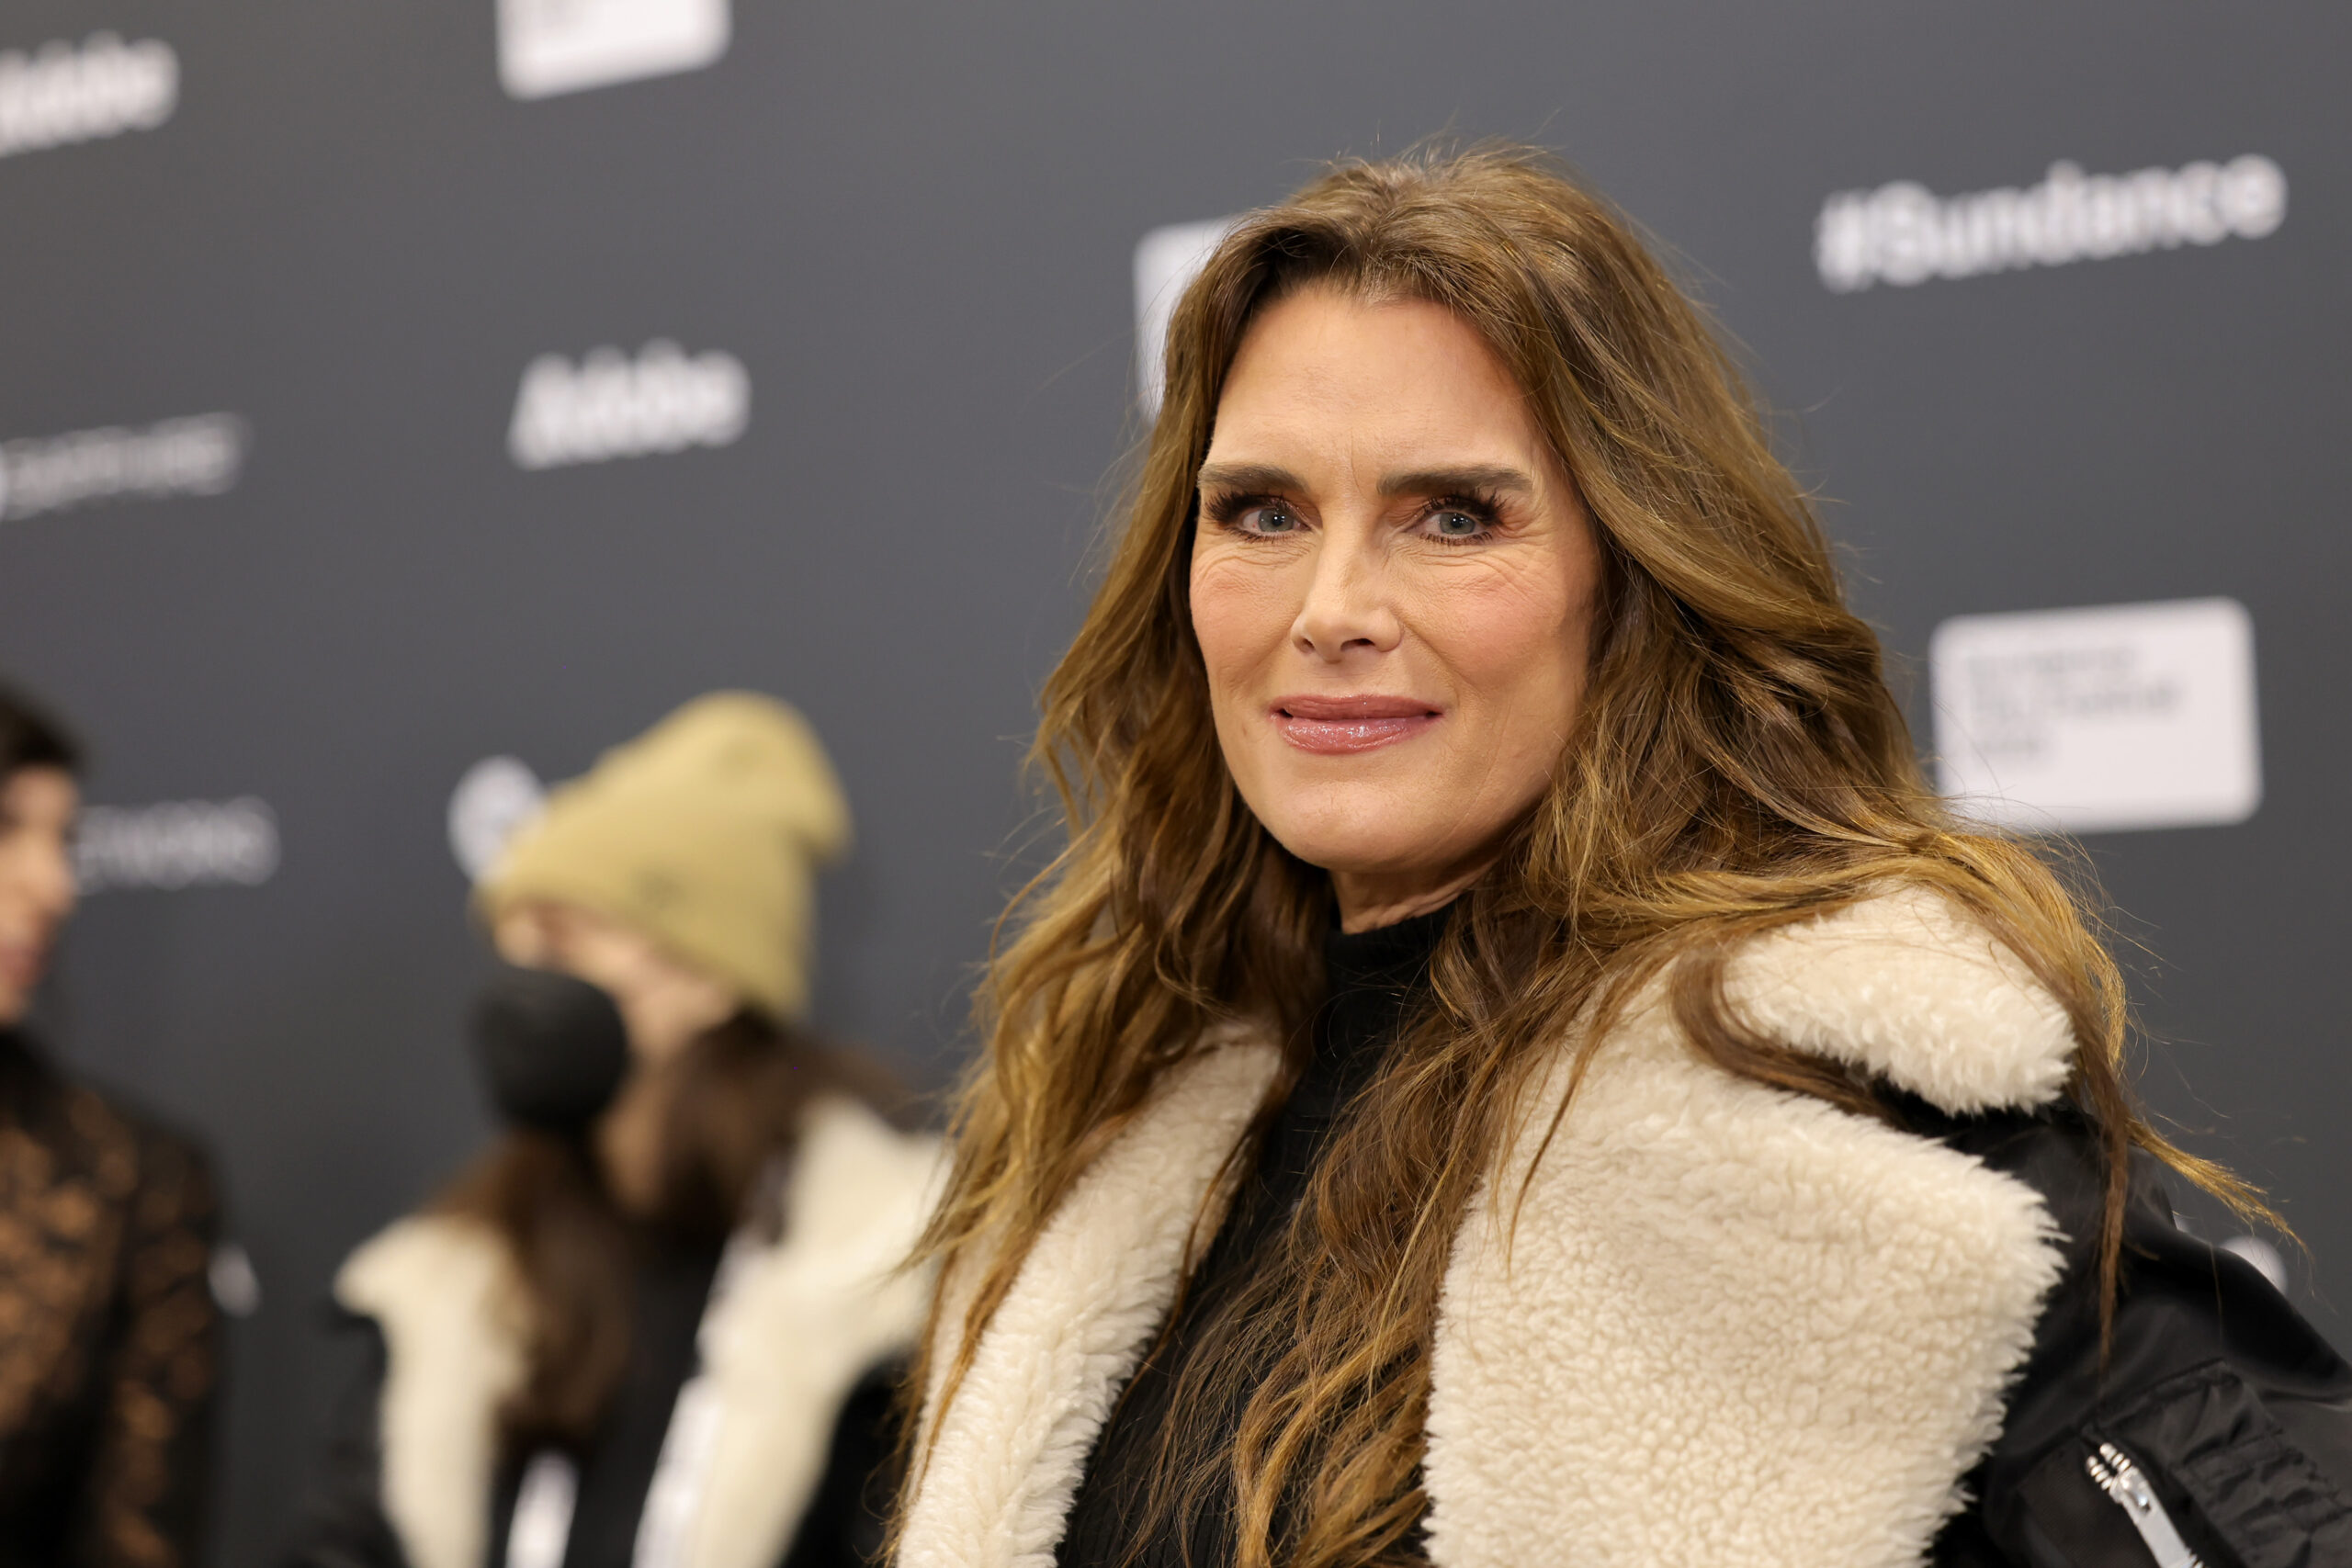 “Pretty Baby Brooke Shields” Introduces the Complex Icon to a New